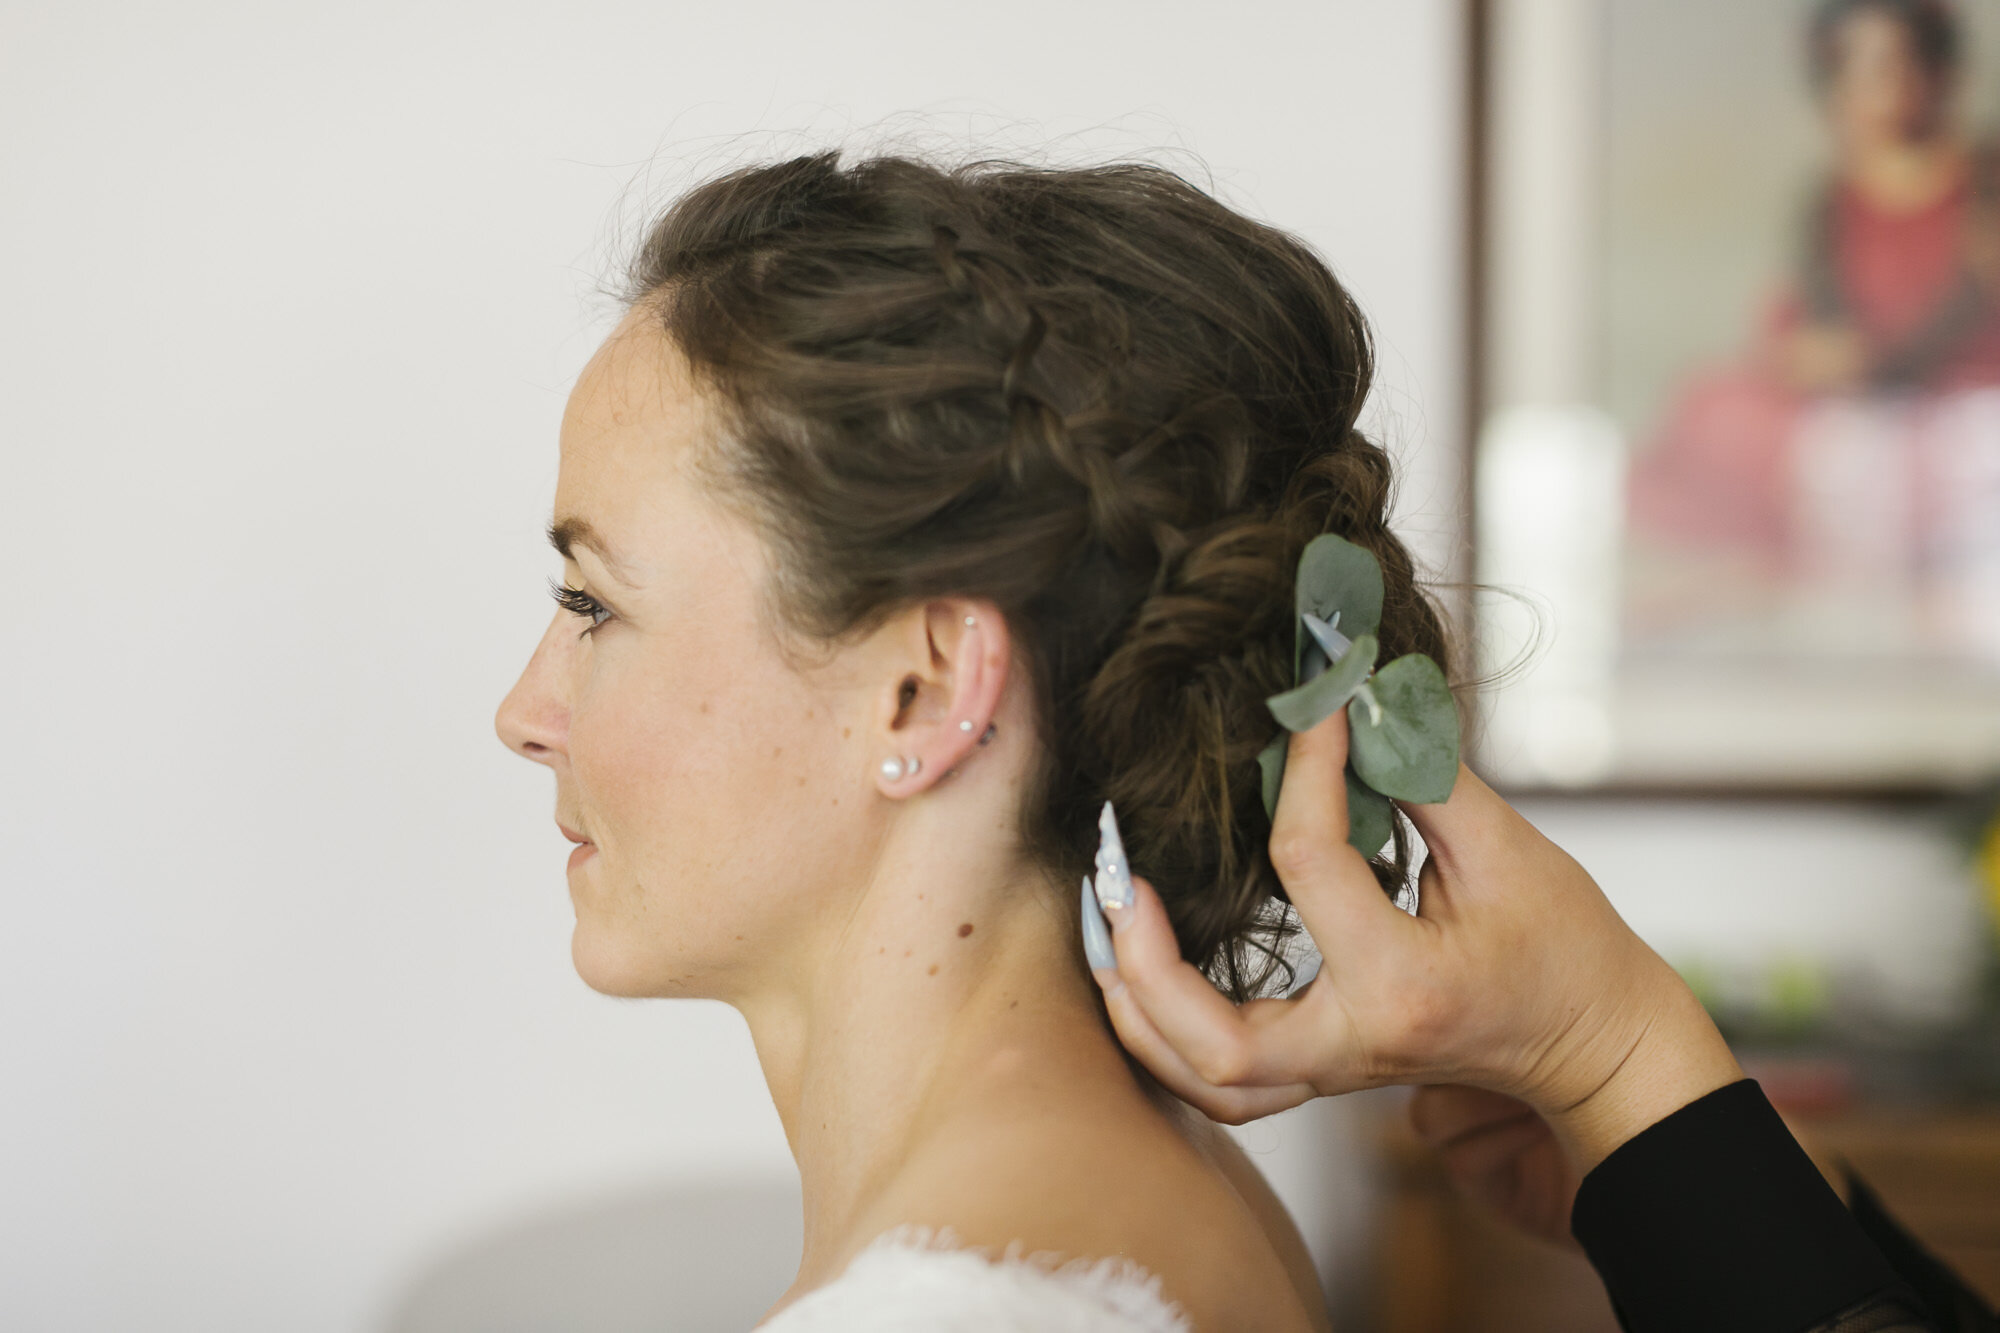 Bride puts greenery in her hair on her wedding day